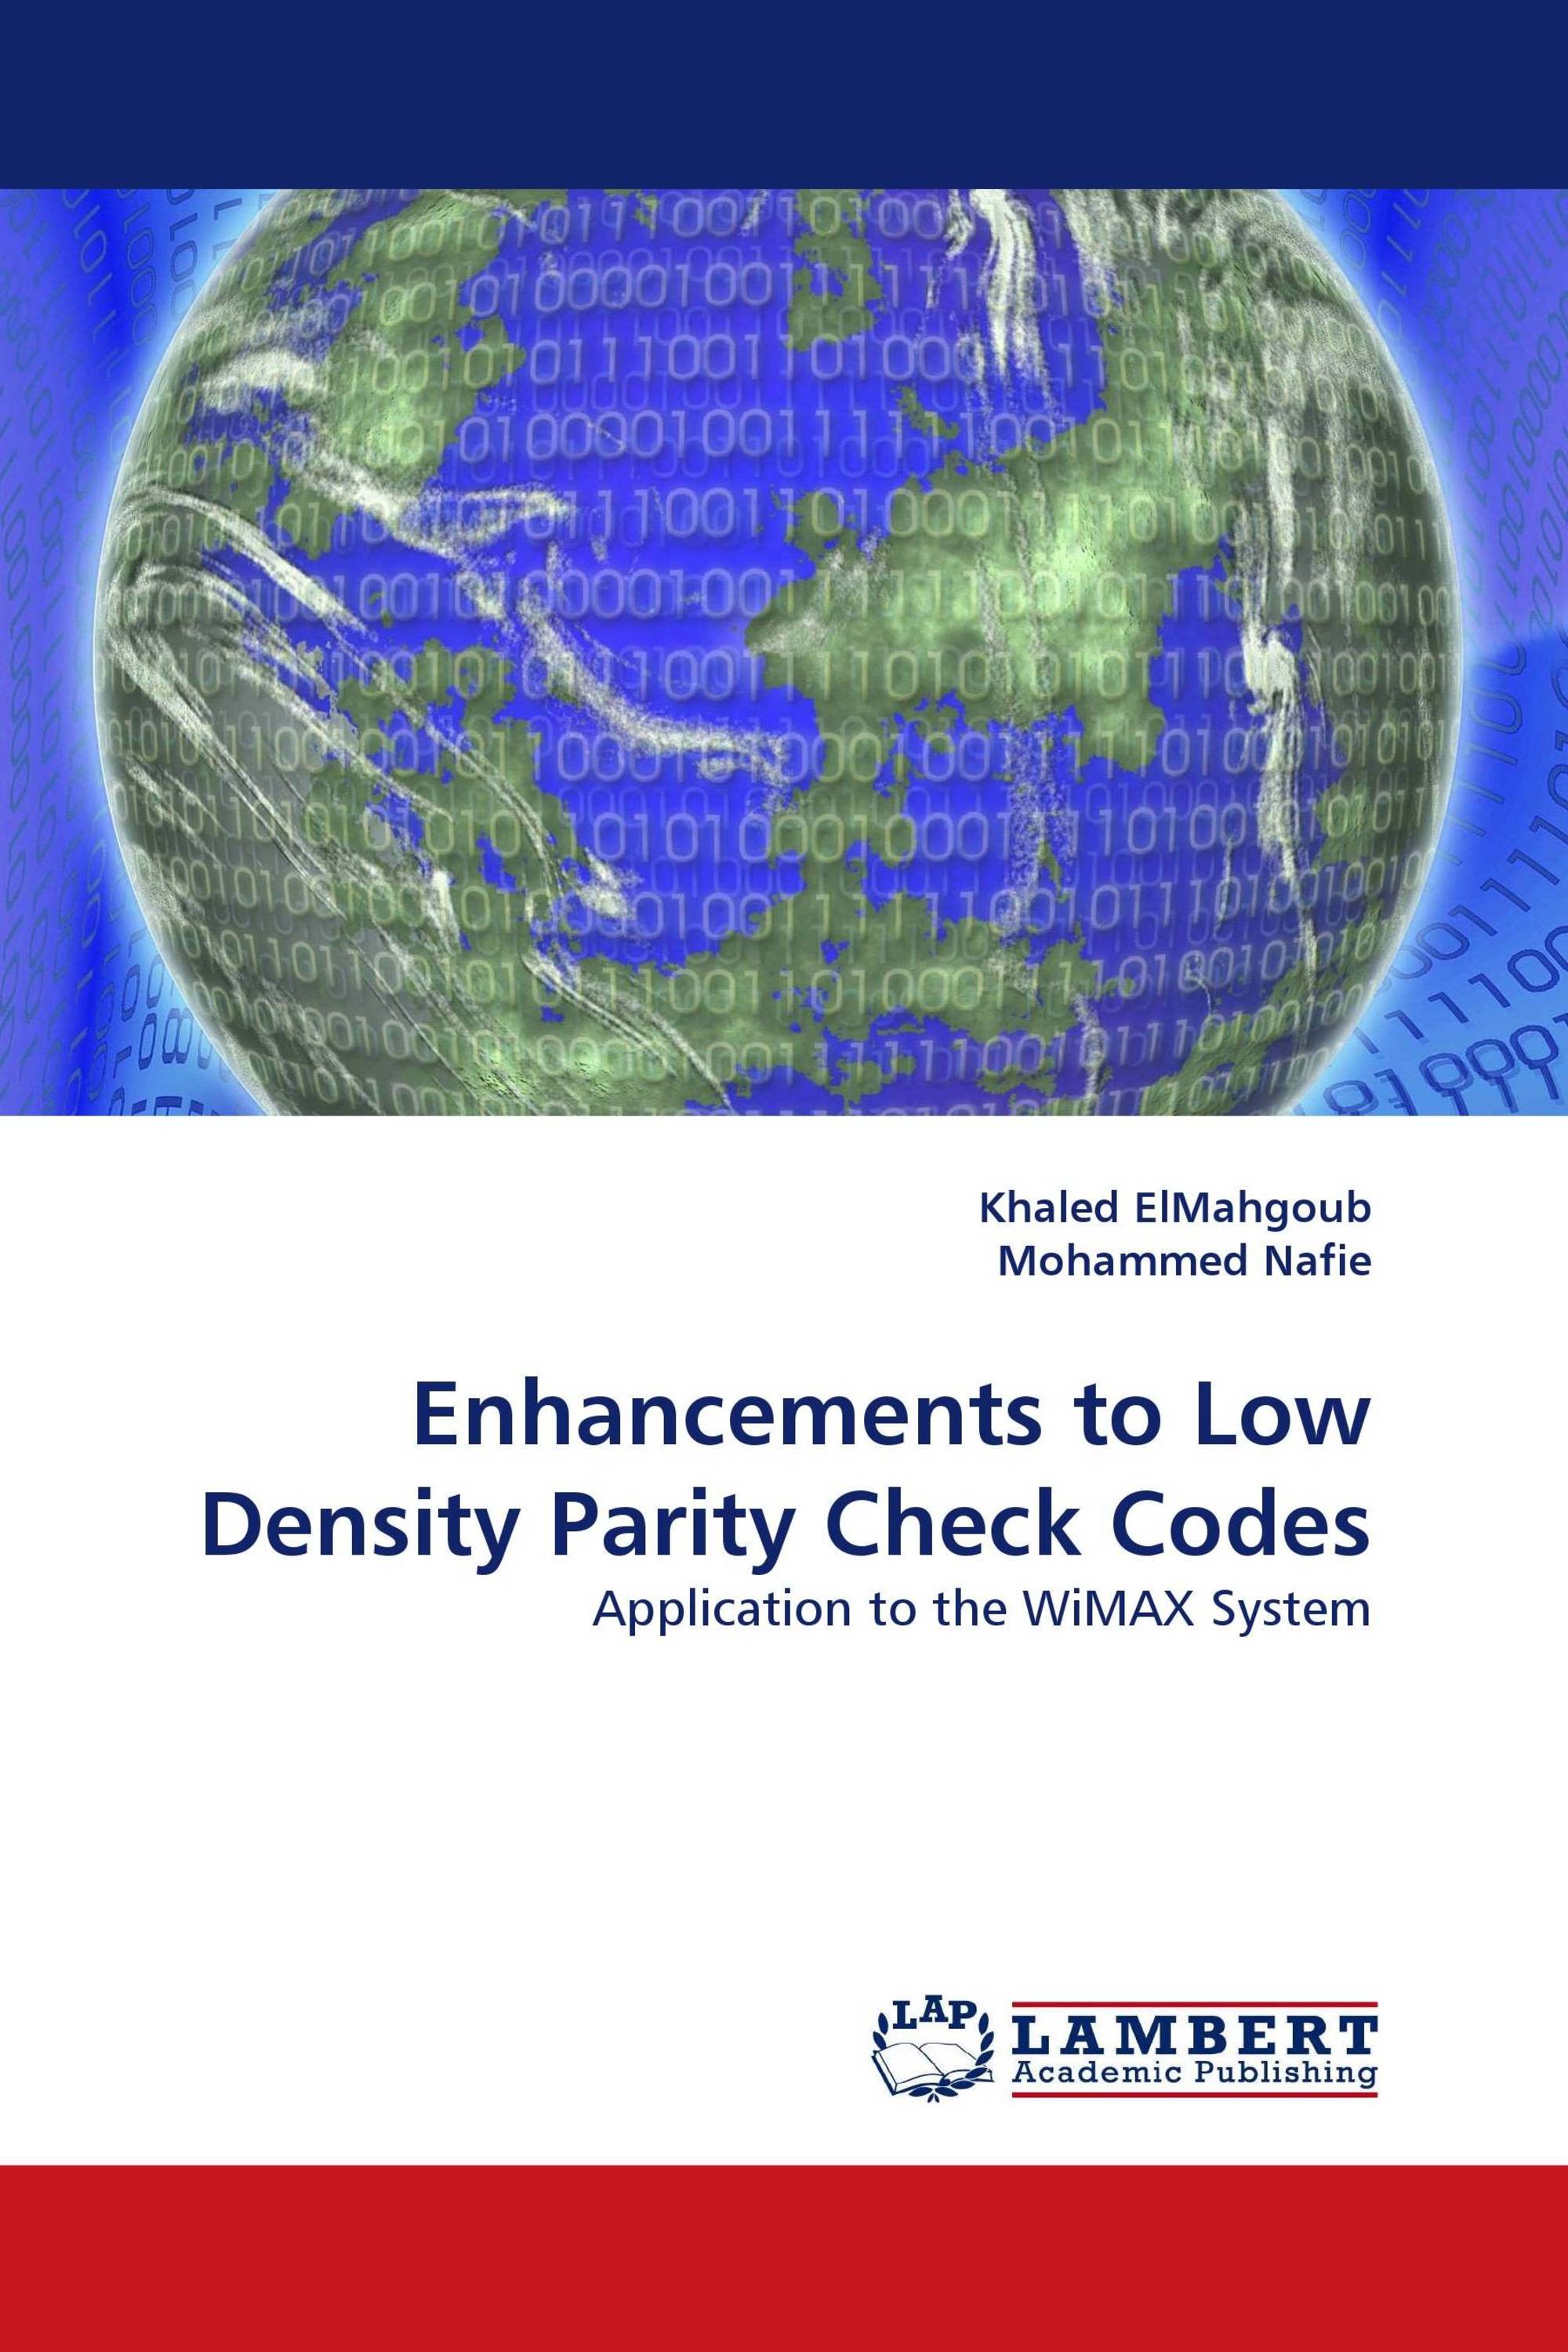 Enhancements to Low Density Parity Check Codes